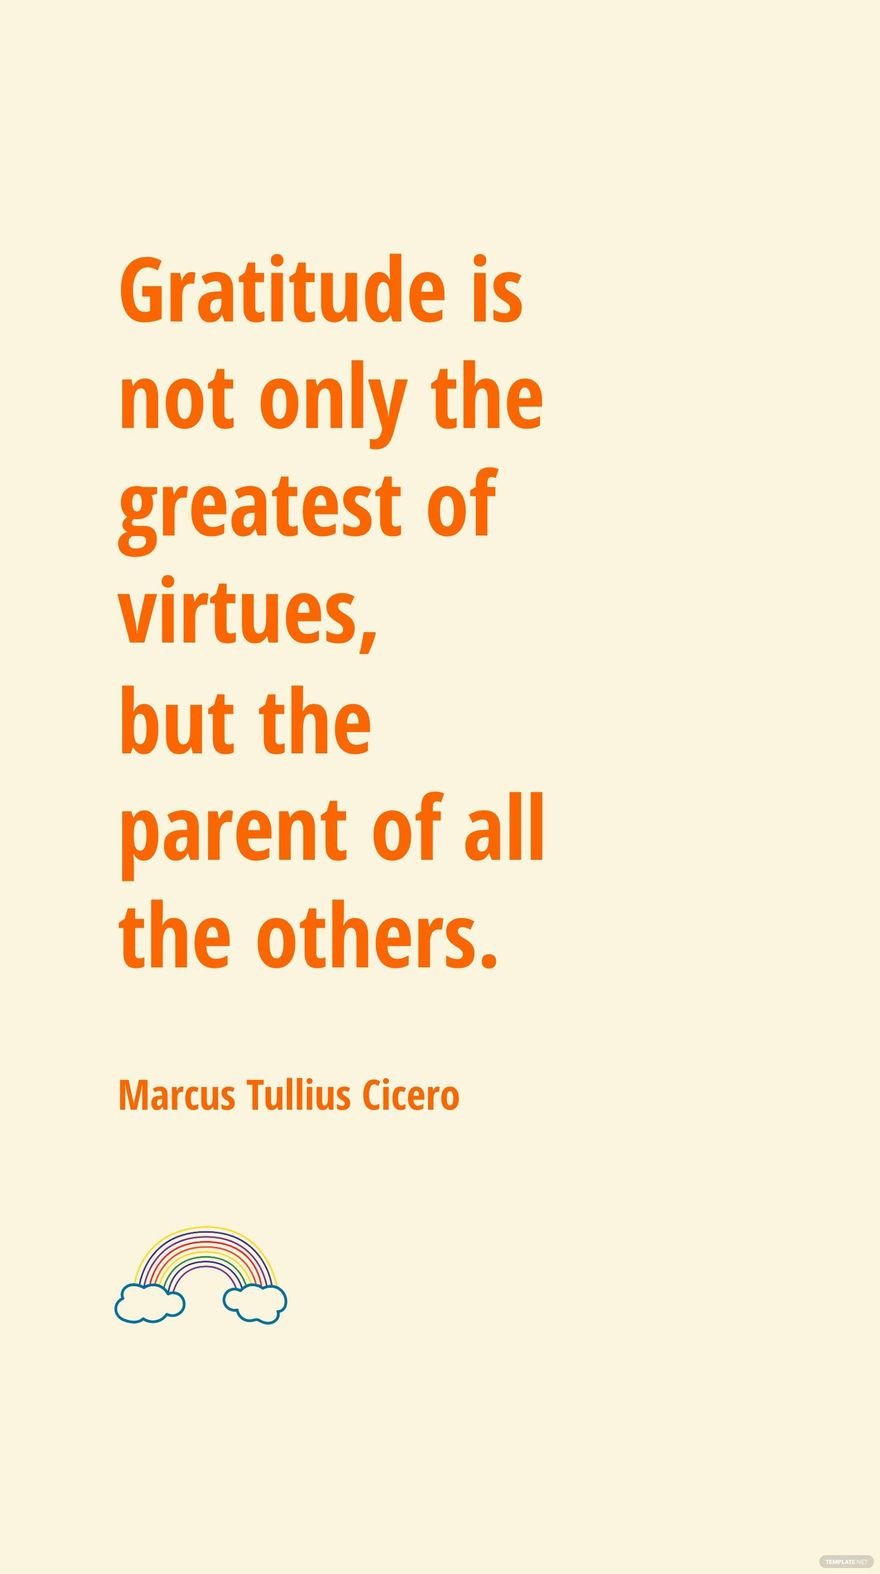 Free Marcus Tullius Cicero - Gratitude is not only the greatest of virtues, but the parent of all the others. in JPG